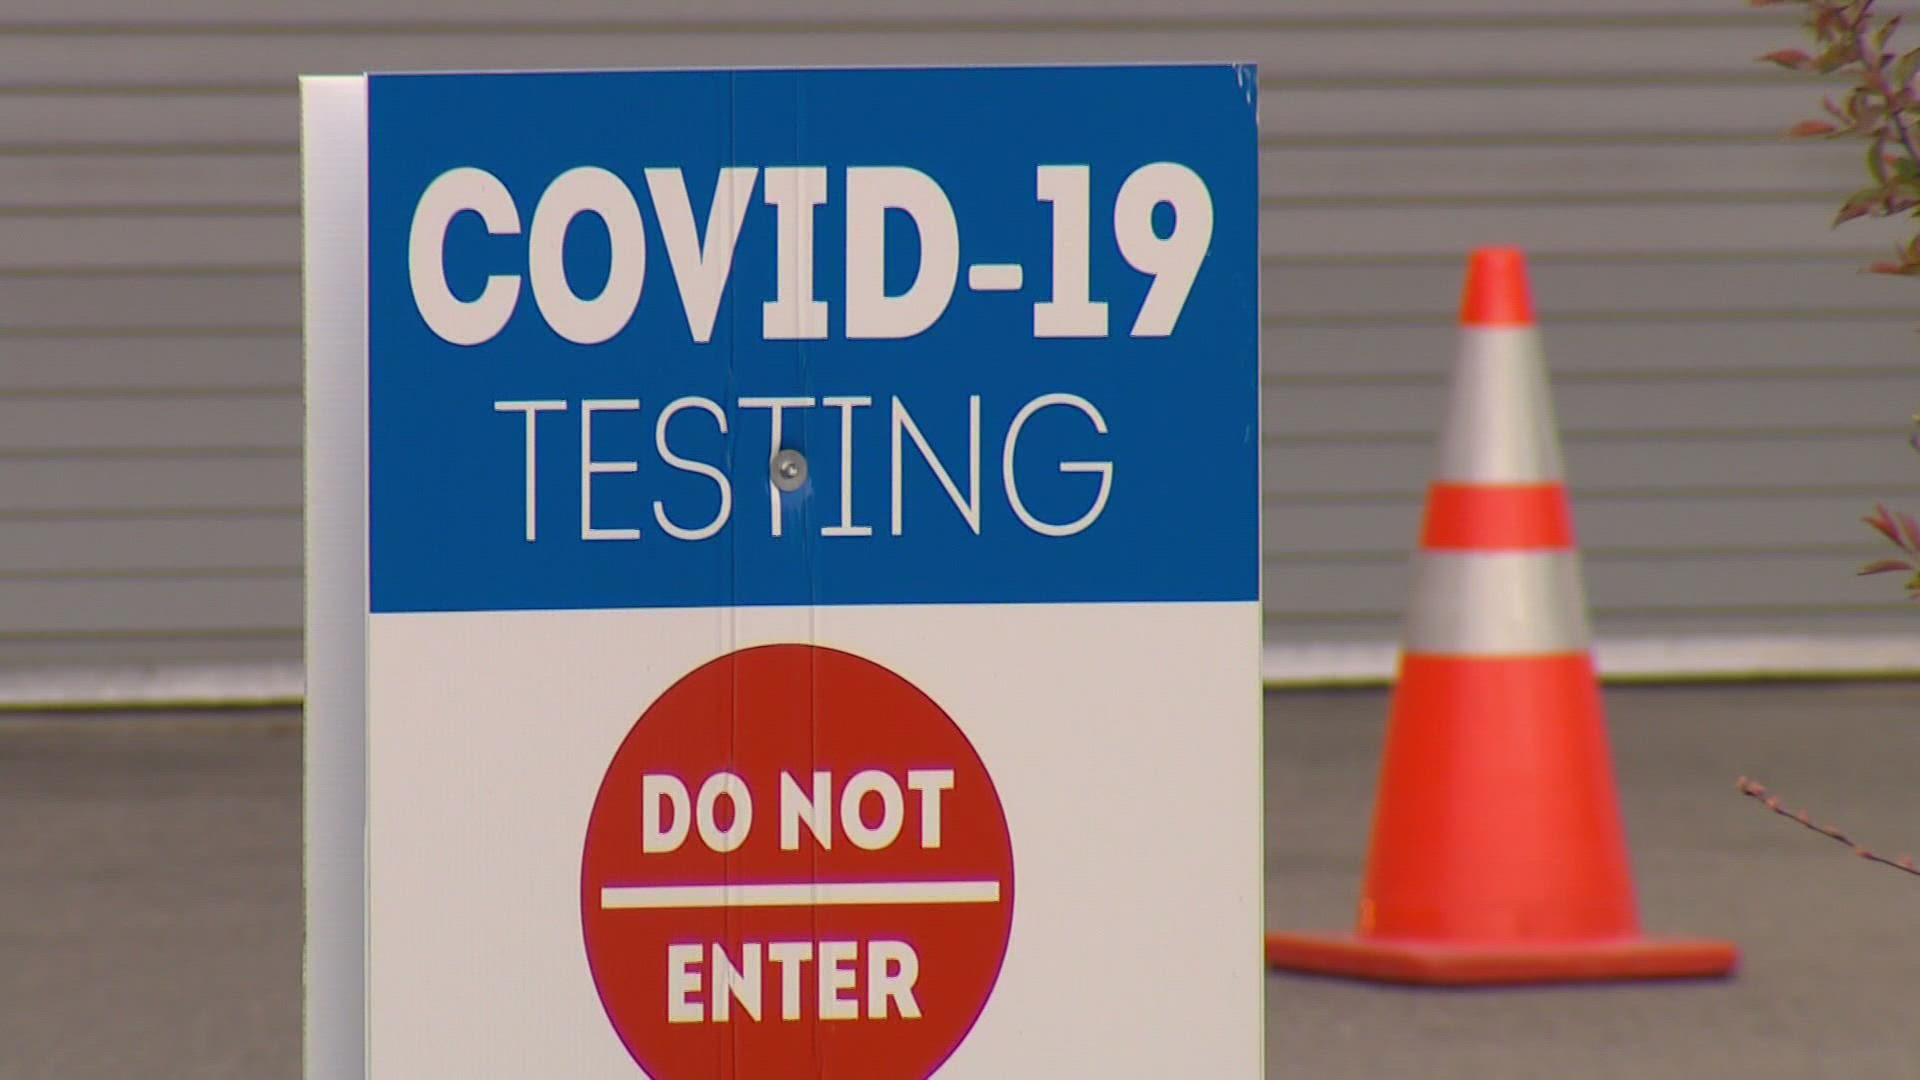 Starting Jan. 3, the Washington State Fairgrounds in Puyallup will become a drive-through COVID-19 testing site.